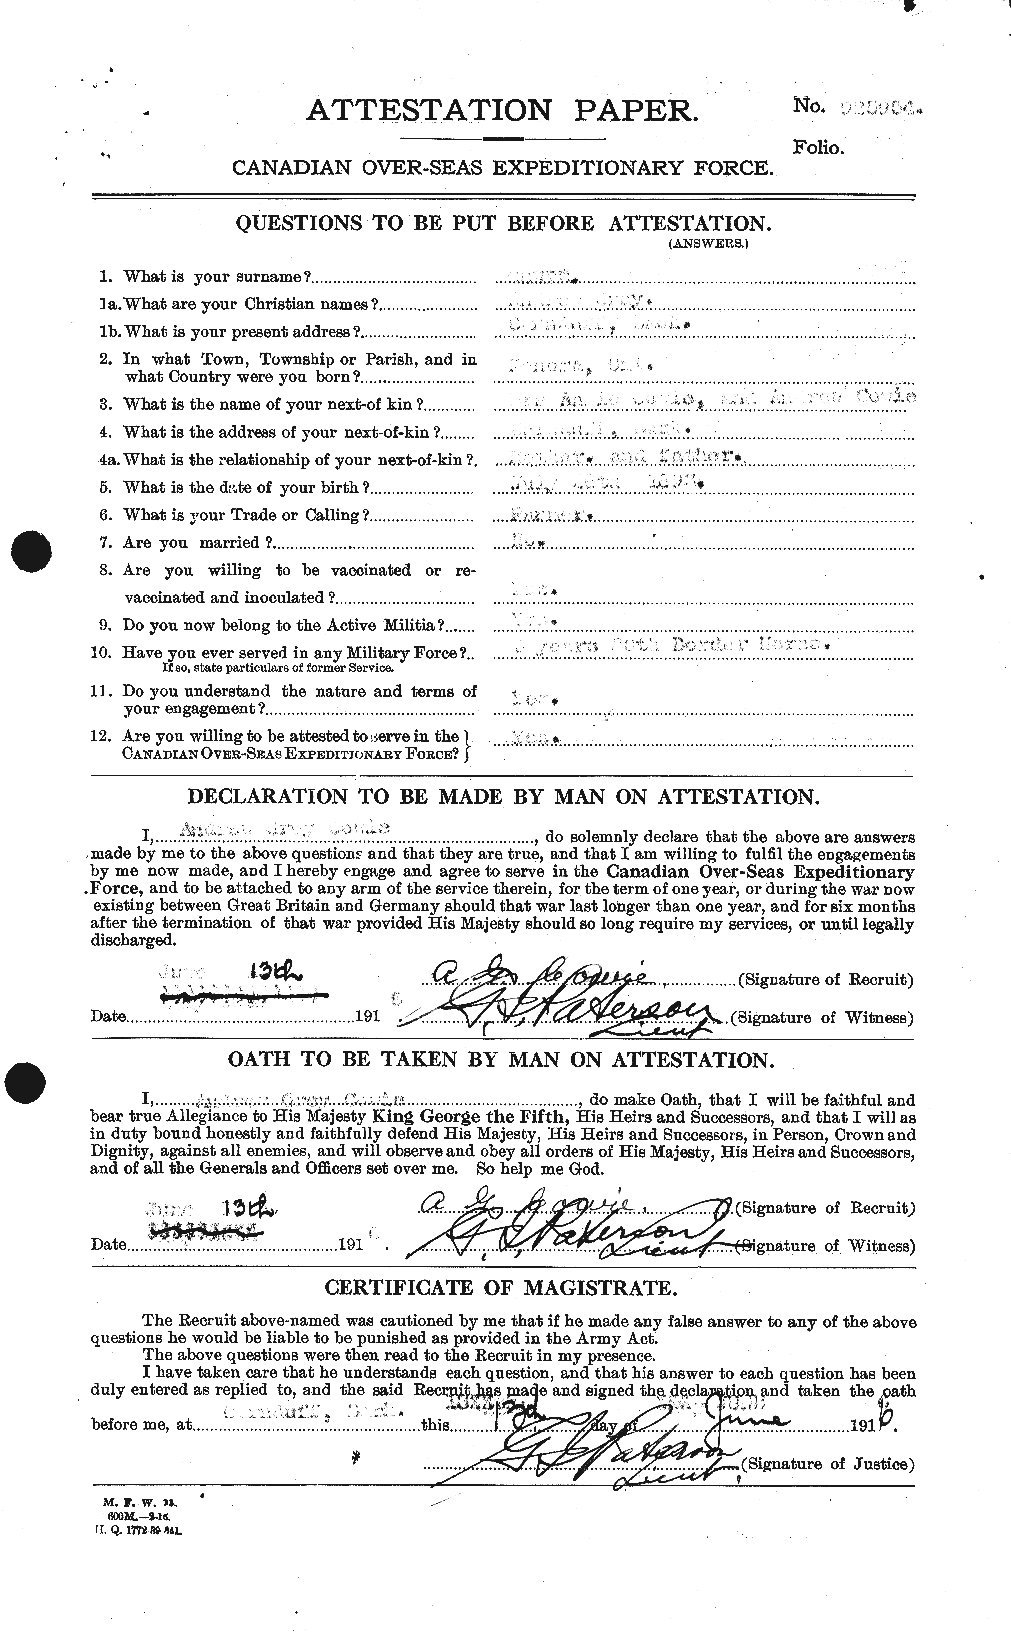 Personnel Records of the First World War - CEF 060035a